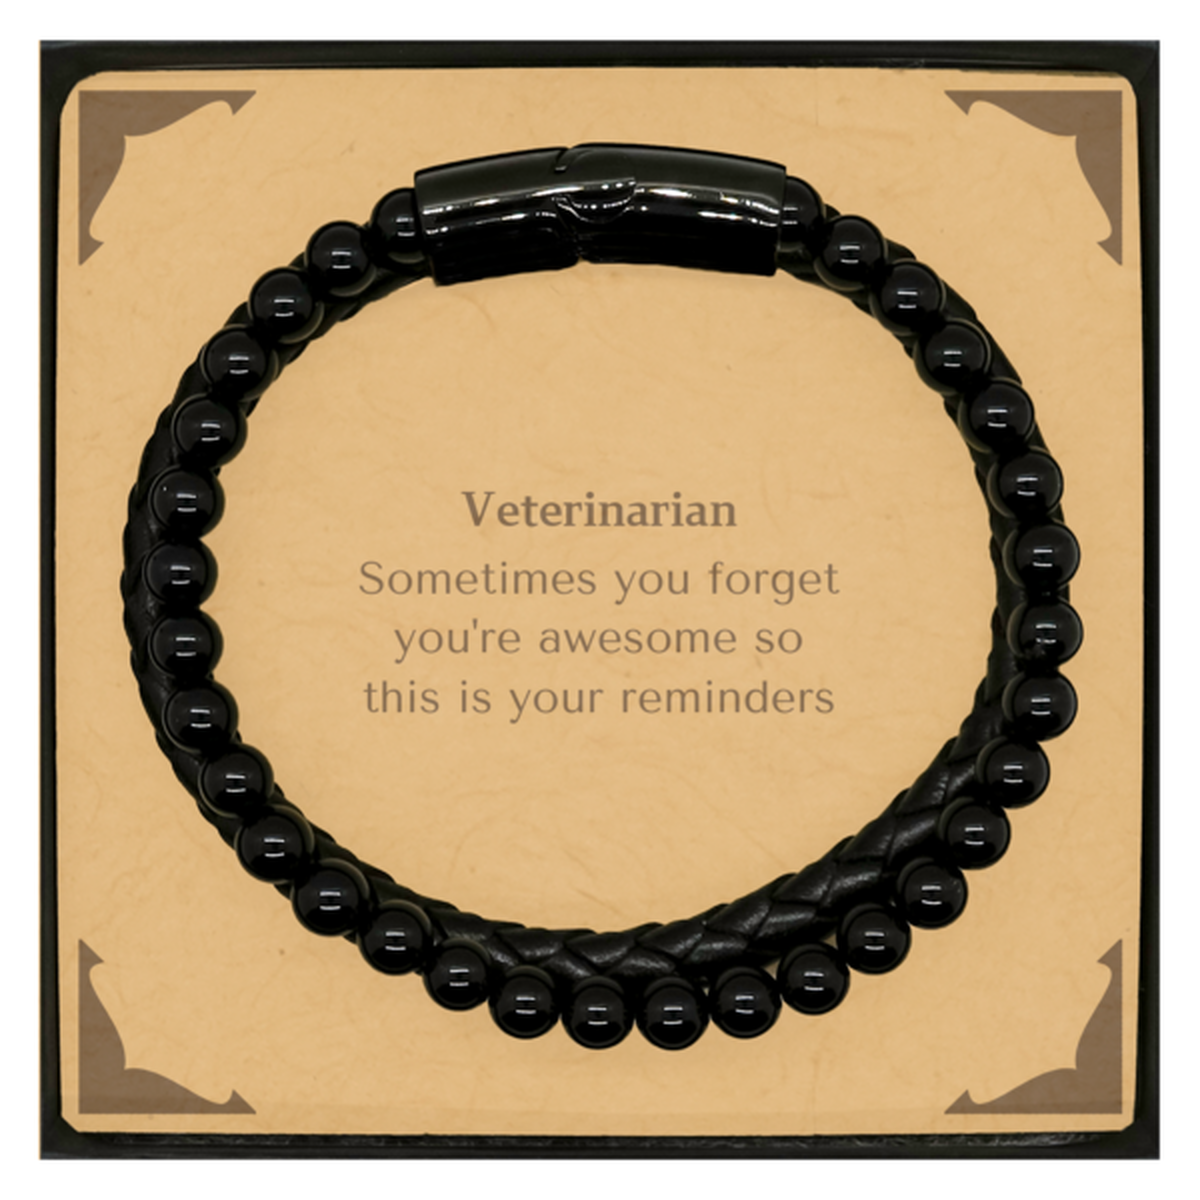 Sentimental Veterinarian Stone Leather Bracelets, Veterinarian Sometimes you forget you're awesome so this is your reminders, Graduation Christmas Birthday Gifts for Veterinarian, Men, Women, Coworkers